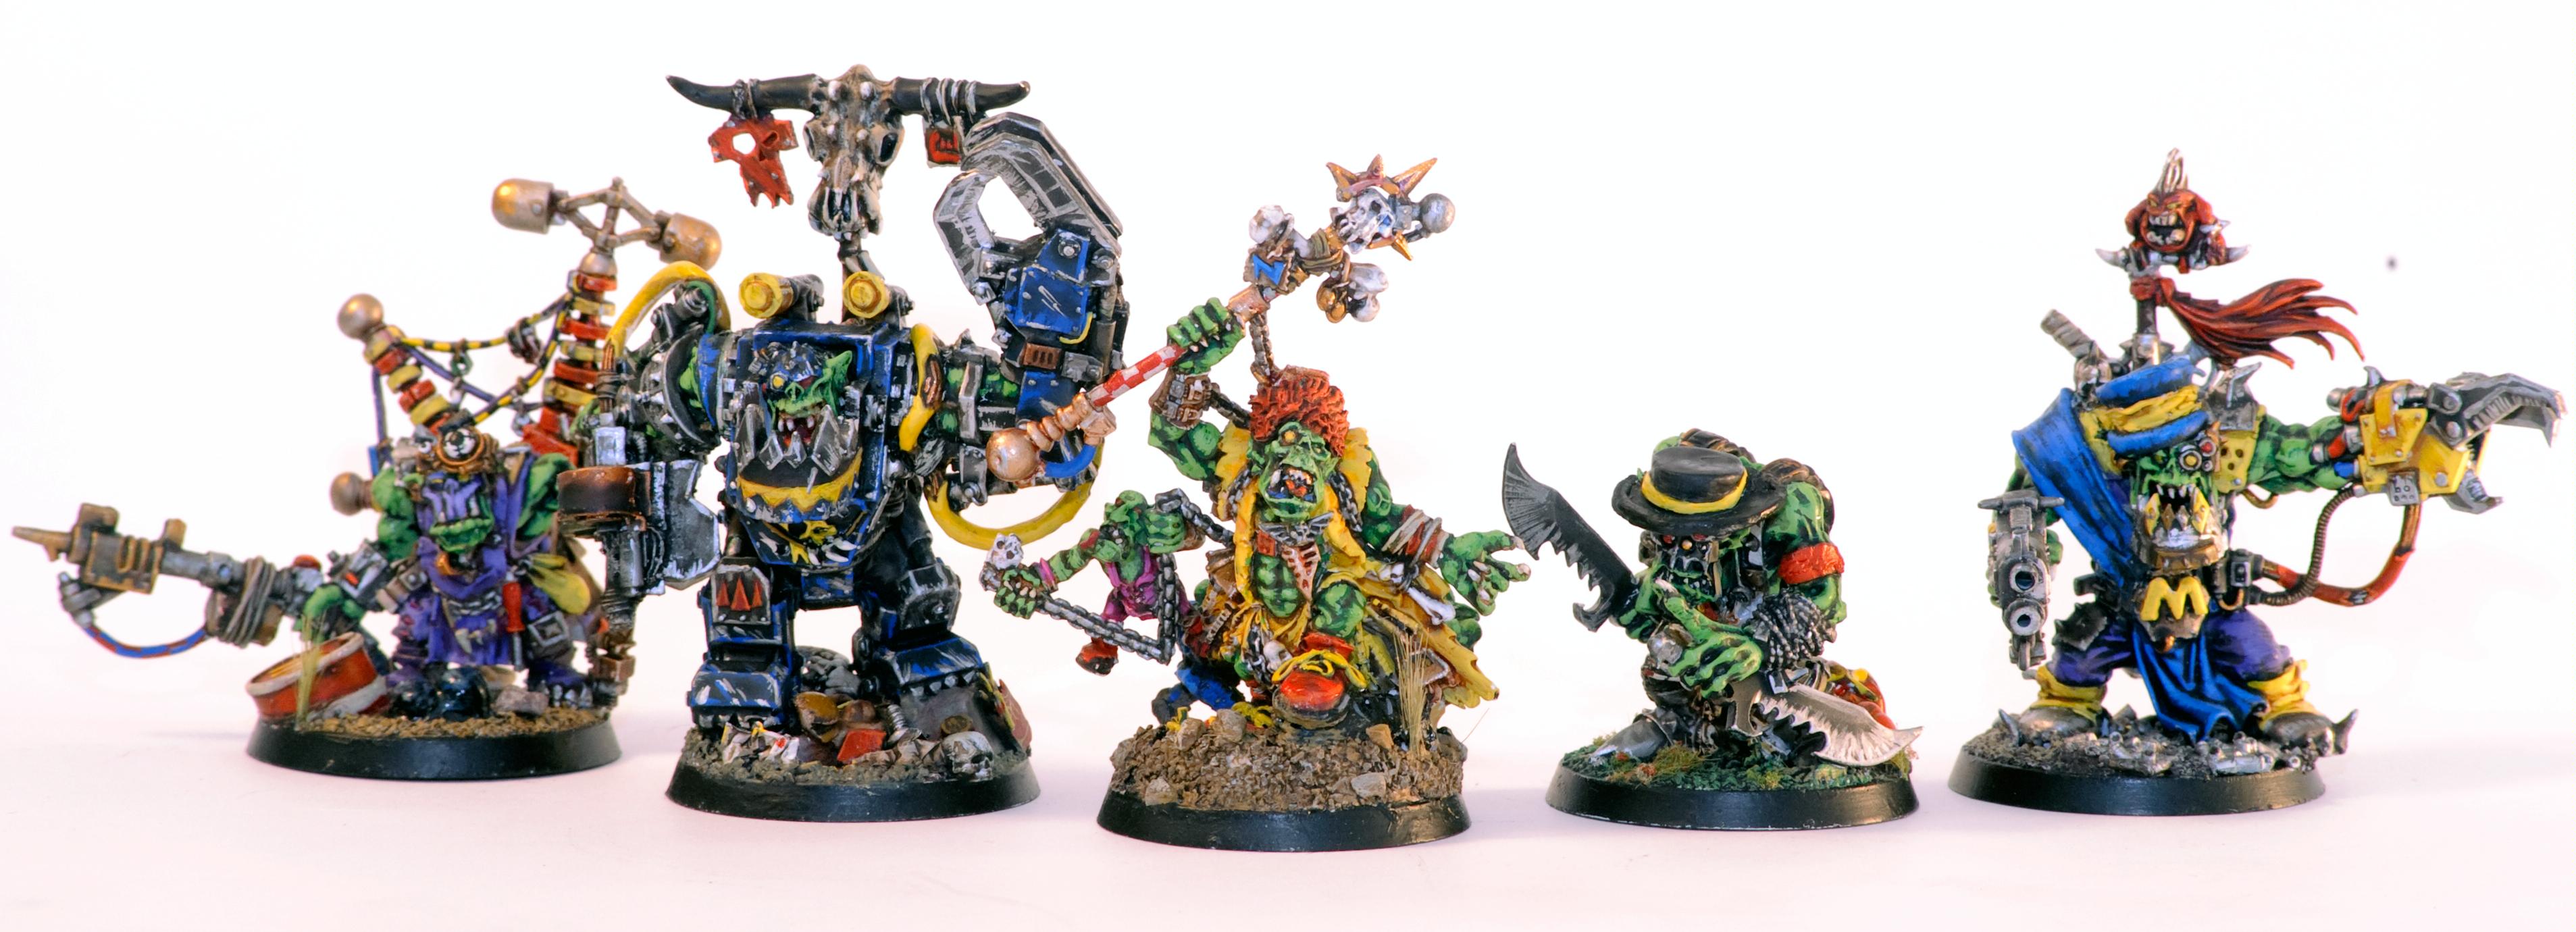 Awesome, Comedy, Humor, Mek Donalds, Orks, Silly, Space Orks, Theme Army